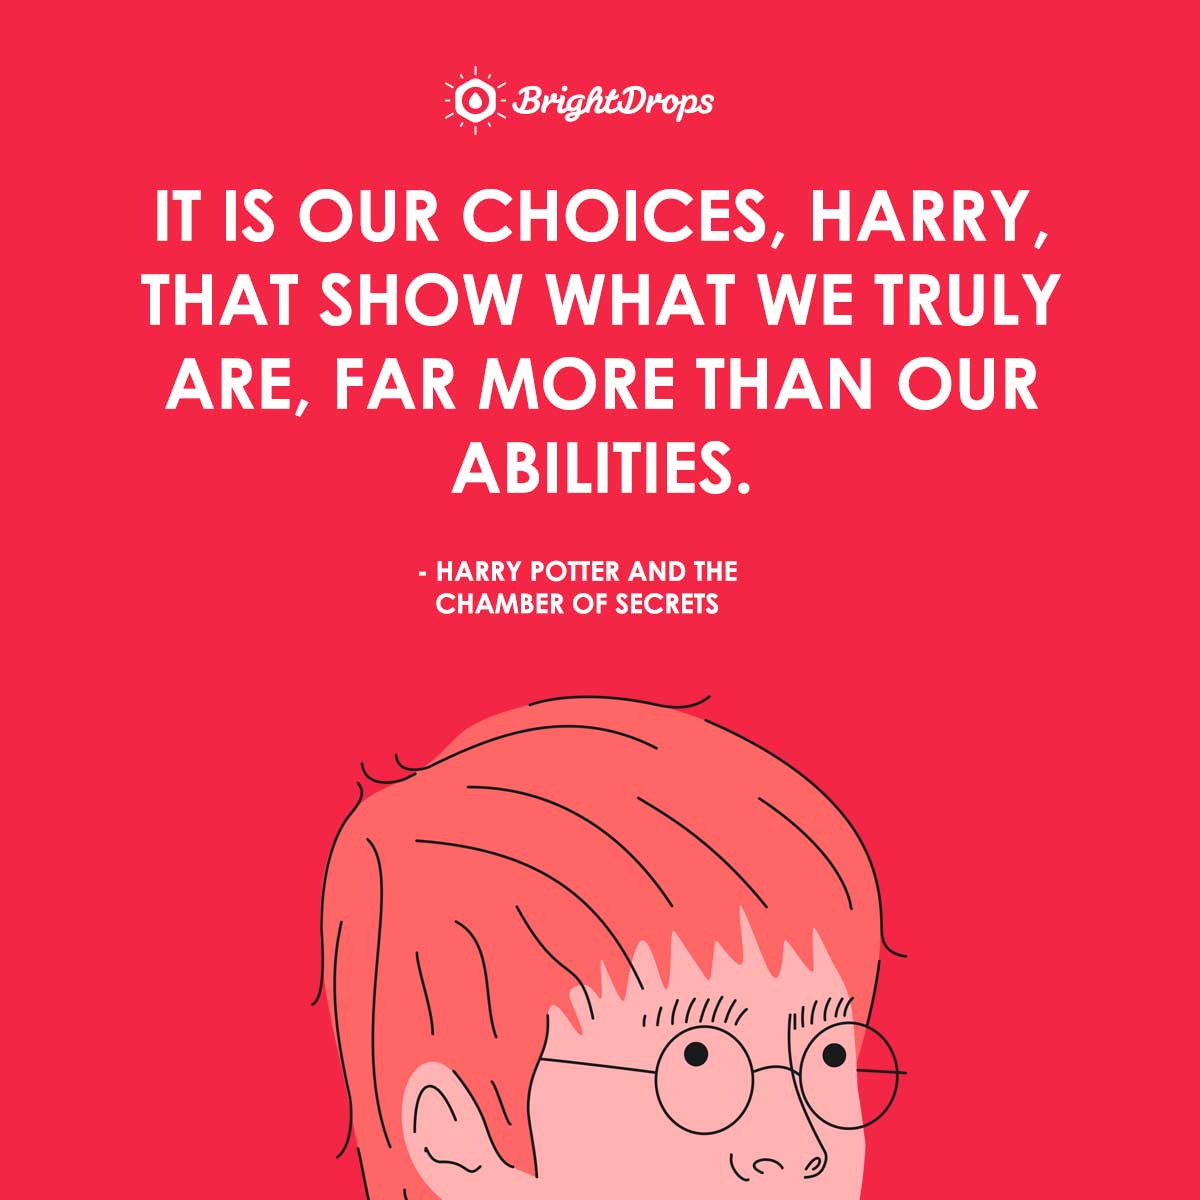 The Harry Potter Cast: Inspirational Quotes and Words of Wisdom 2